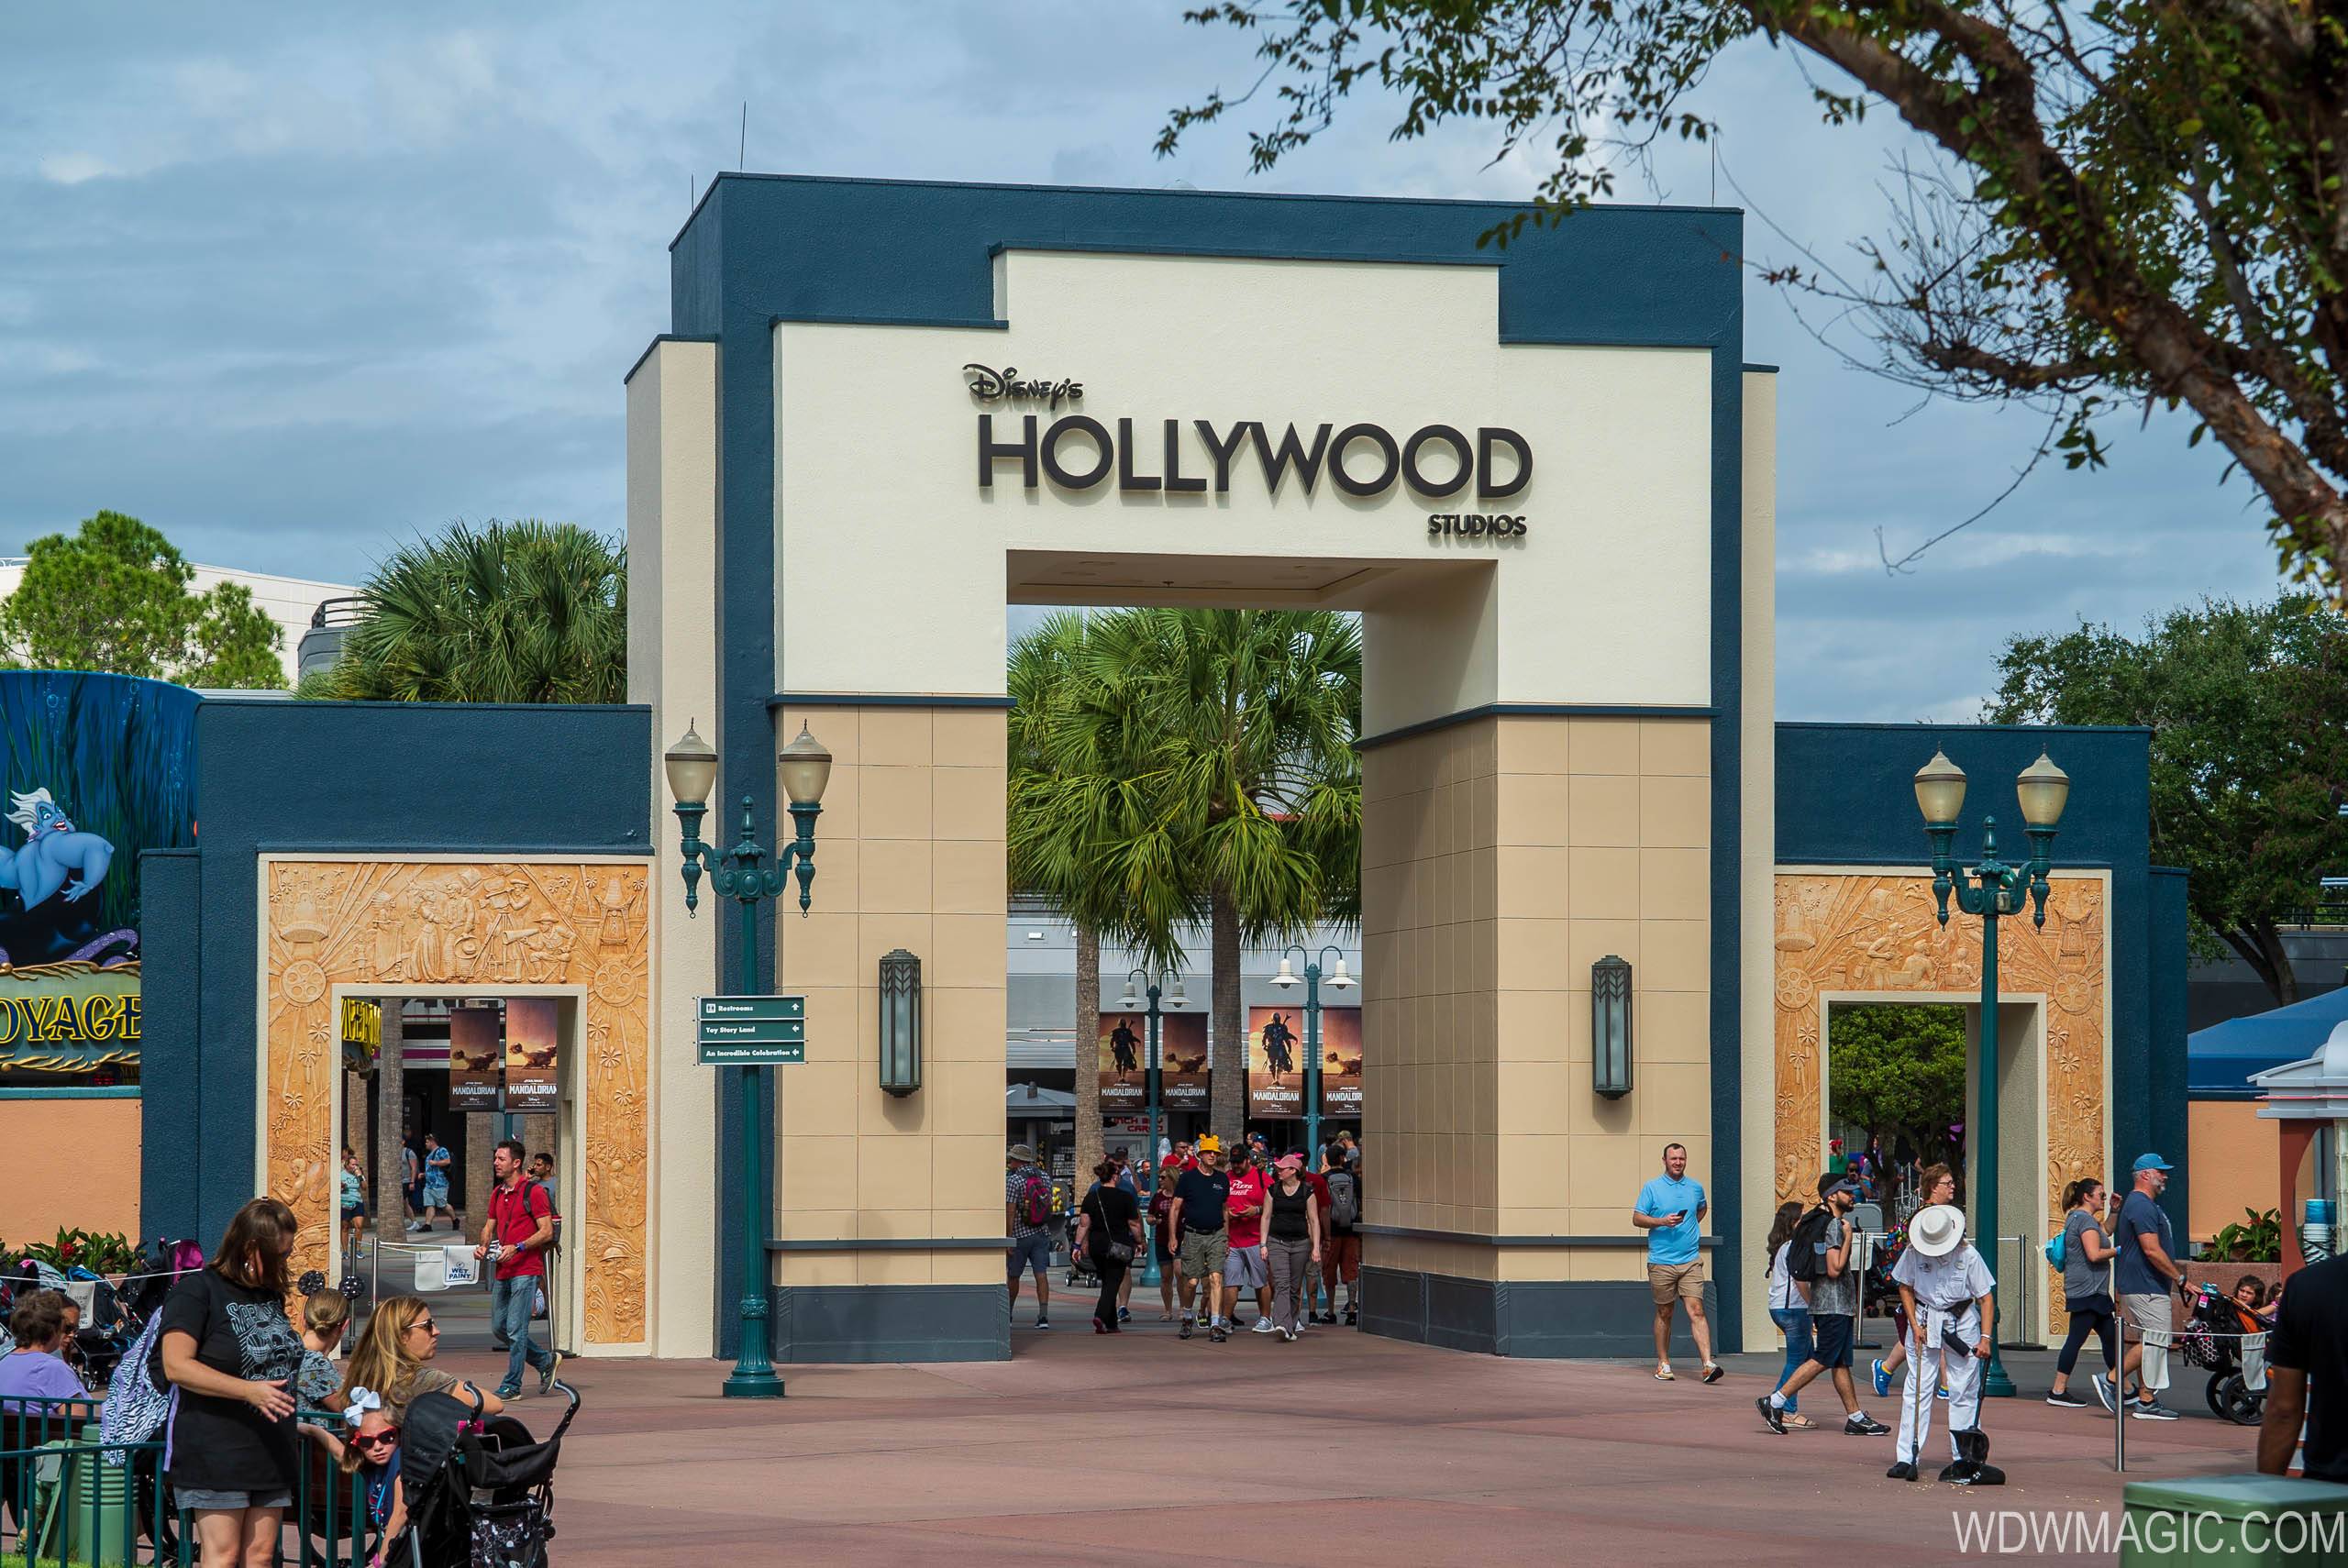 Disney's Hollywood Studios will see the return of another show